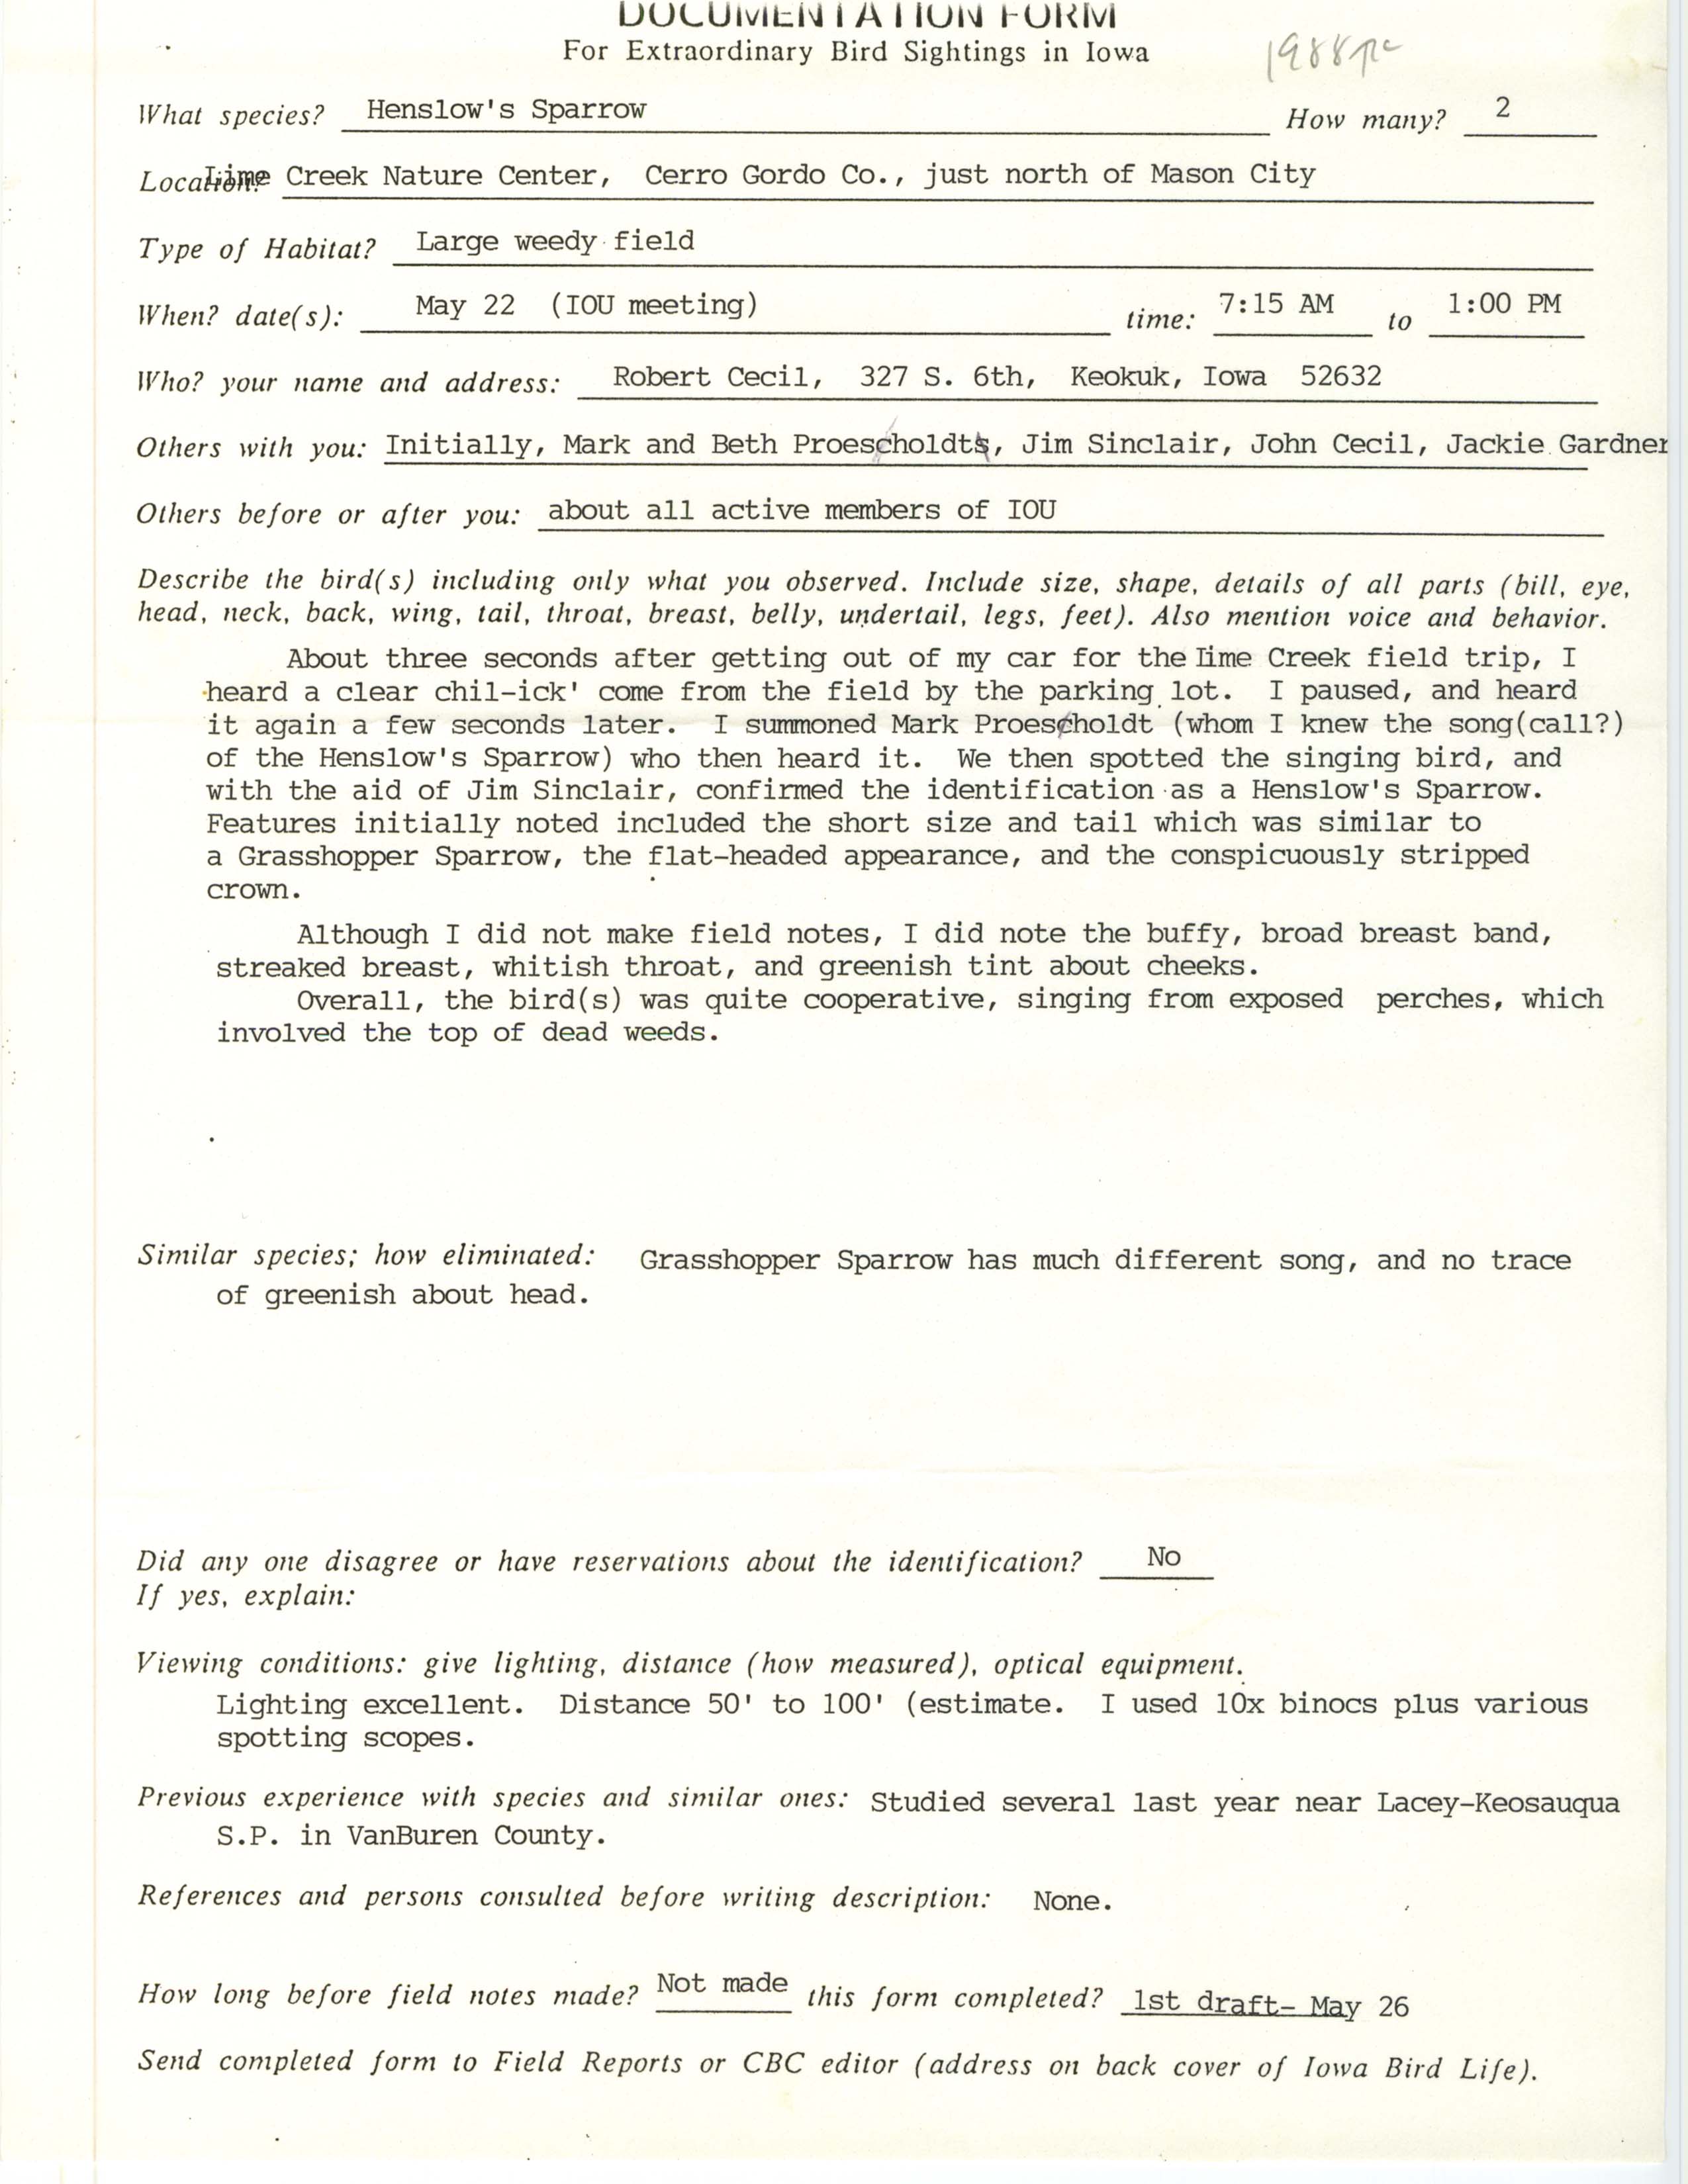 Rare bird documentation form for Henslow's Sparrow at Lime Creek Nature Center in 1988